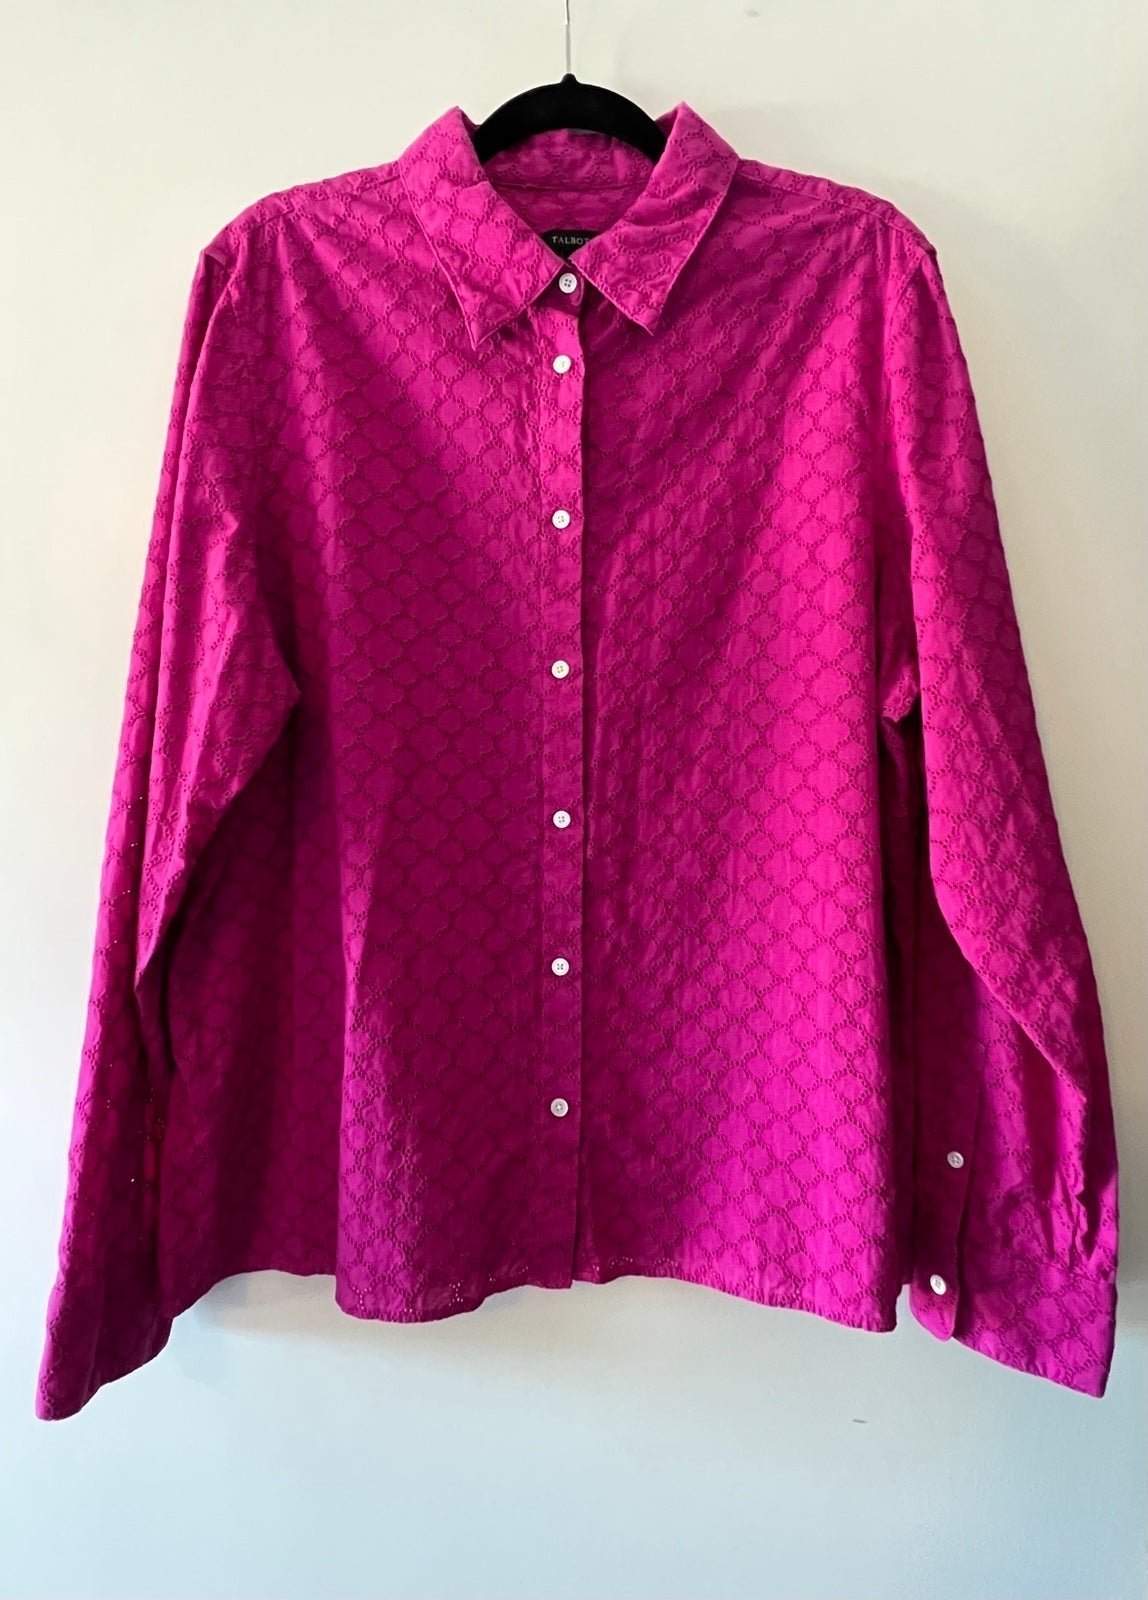 The Best Seller Talbots Hot Pink, 100% Cotton, Long Sle